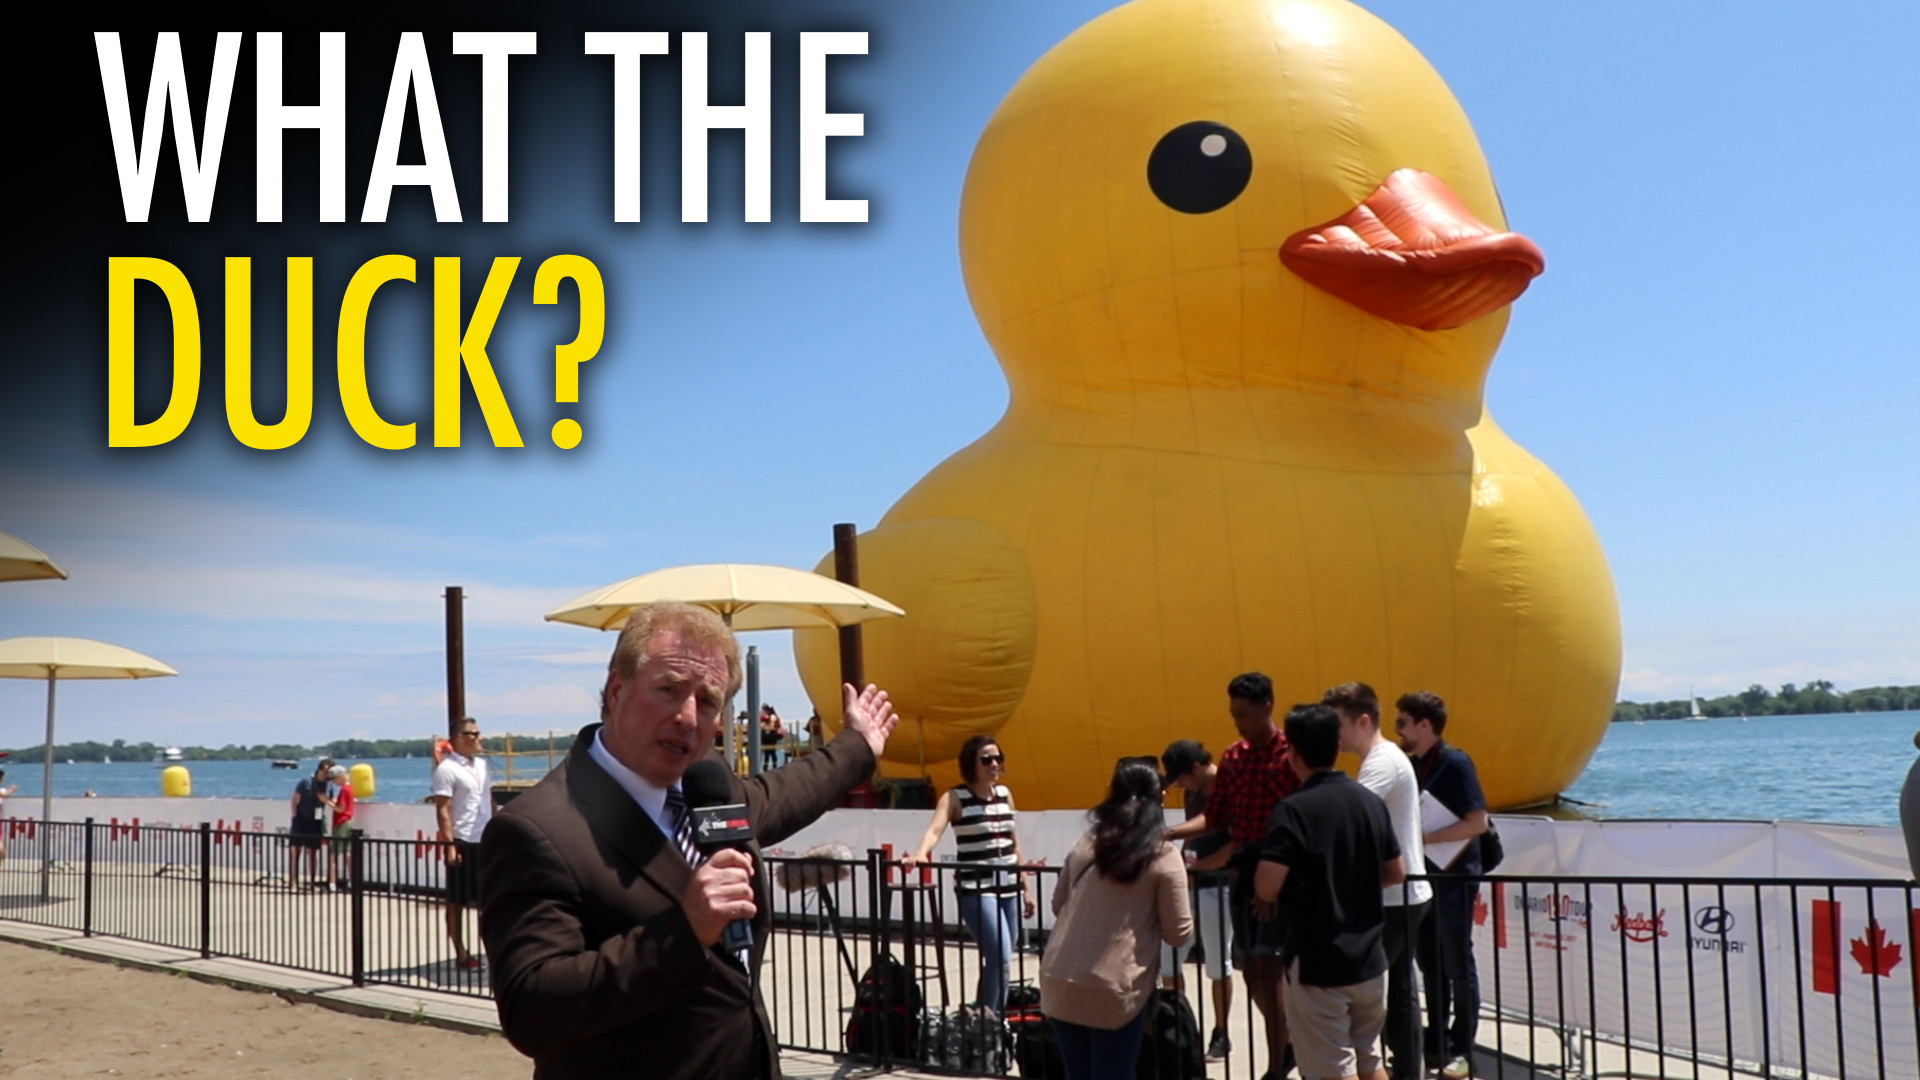 1920x1080 Ontarians take a bath on Canada Day: $200K for world's largest rubber duck  - The Rebel